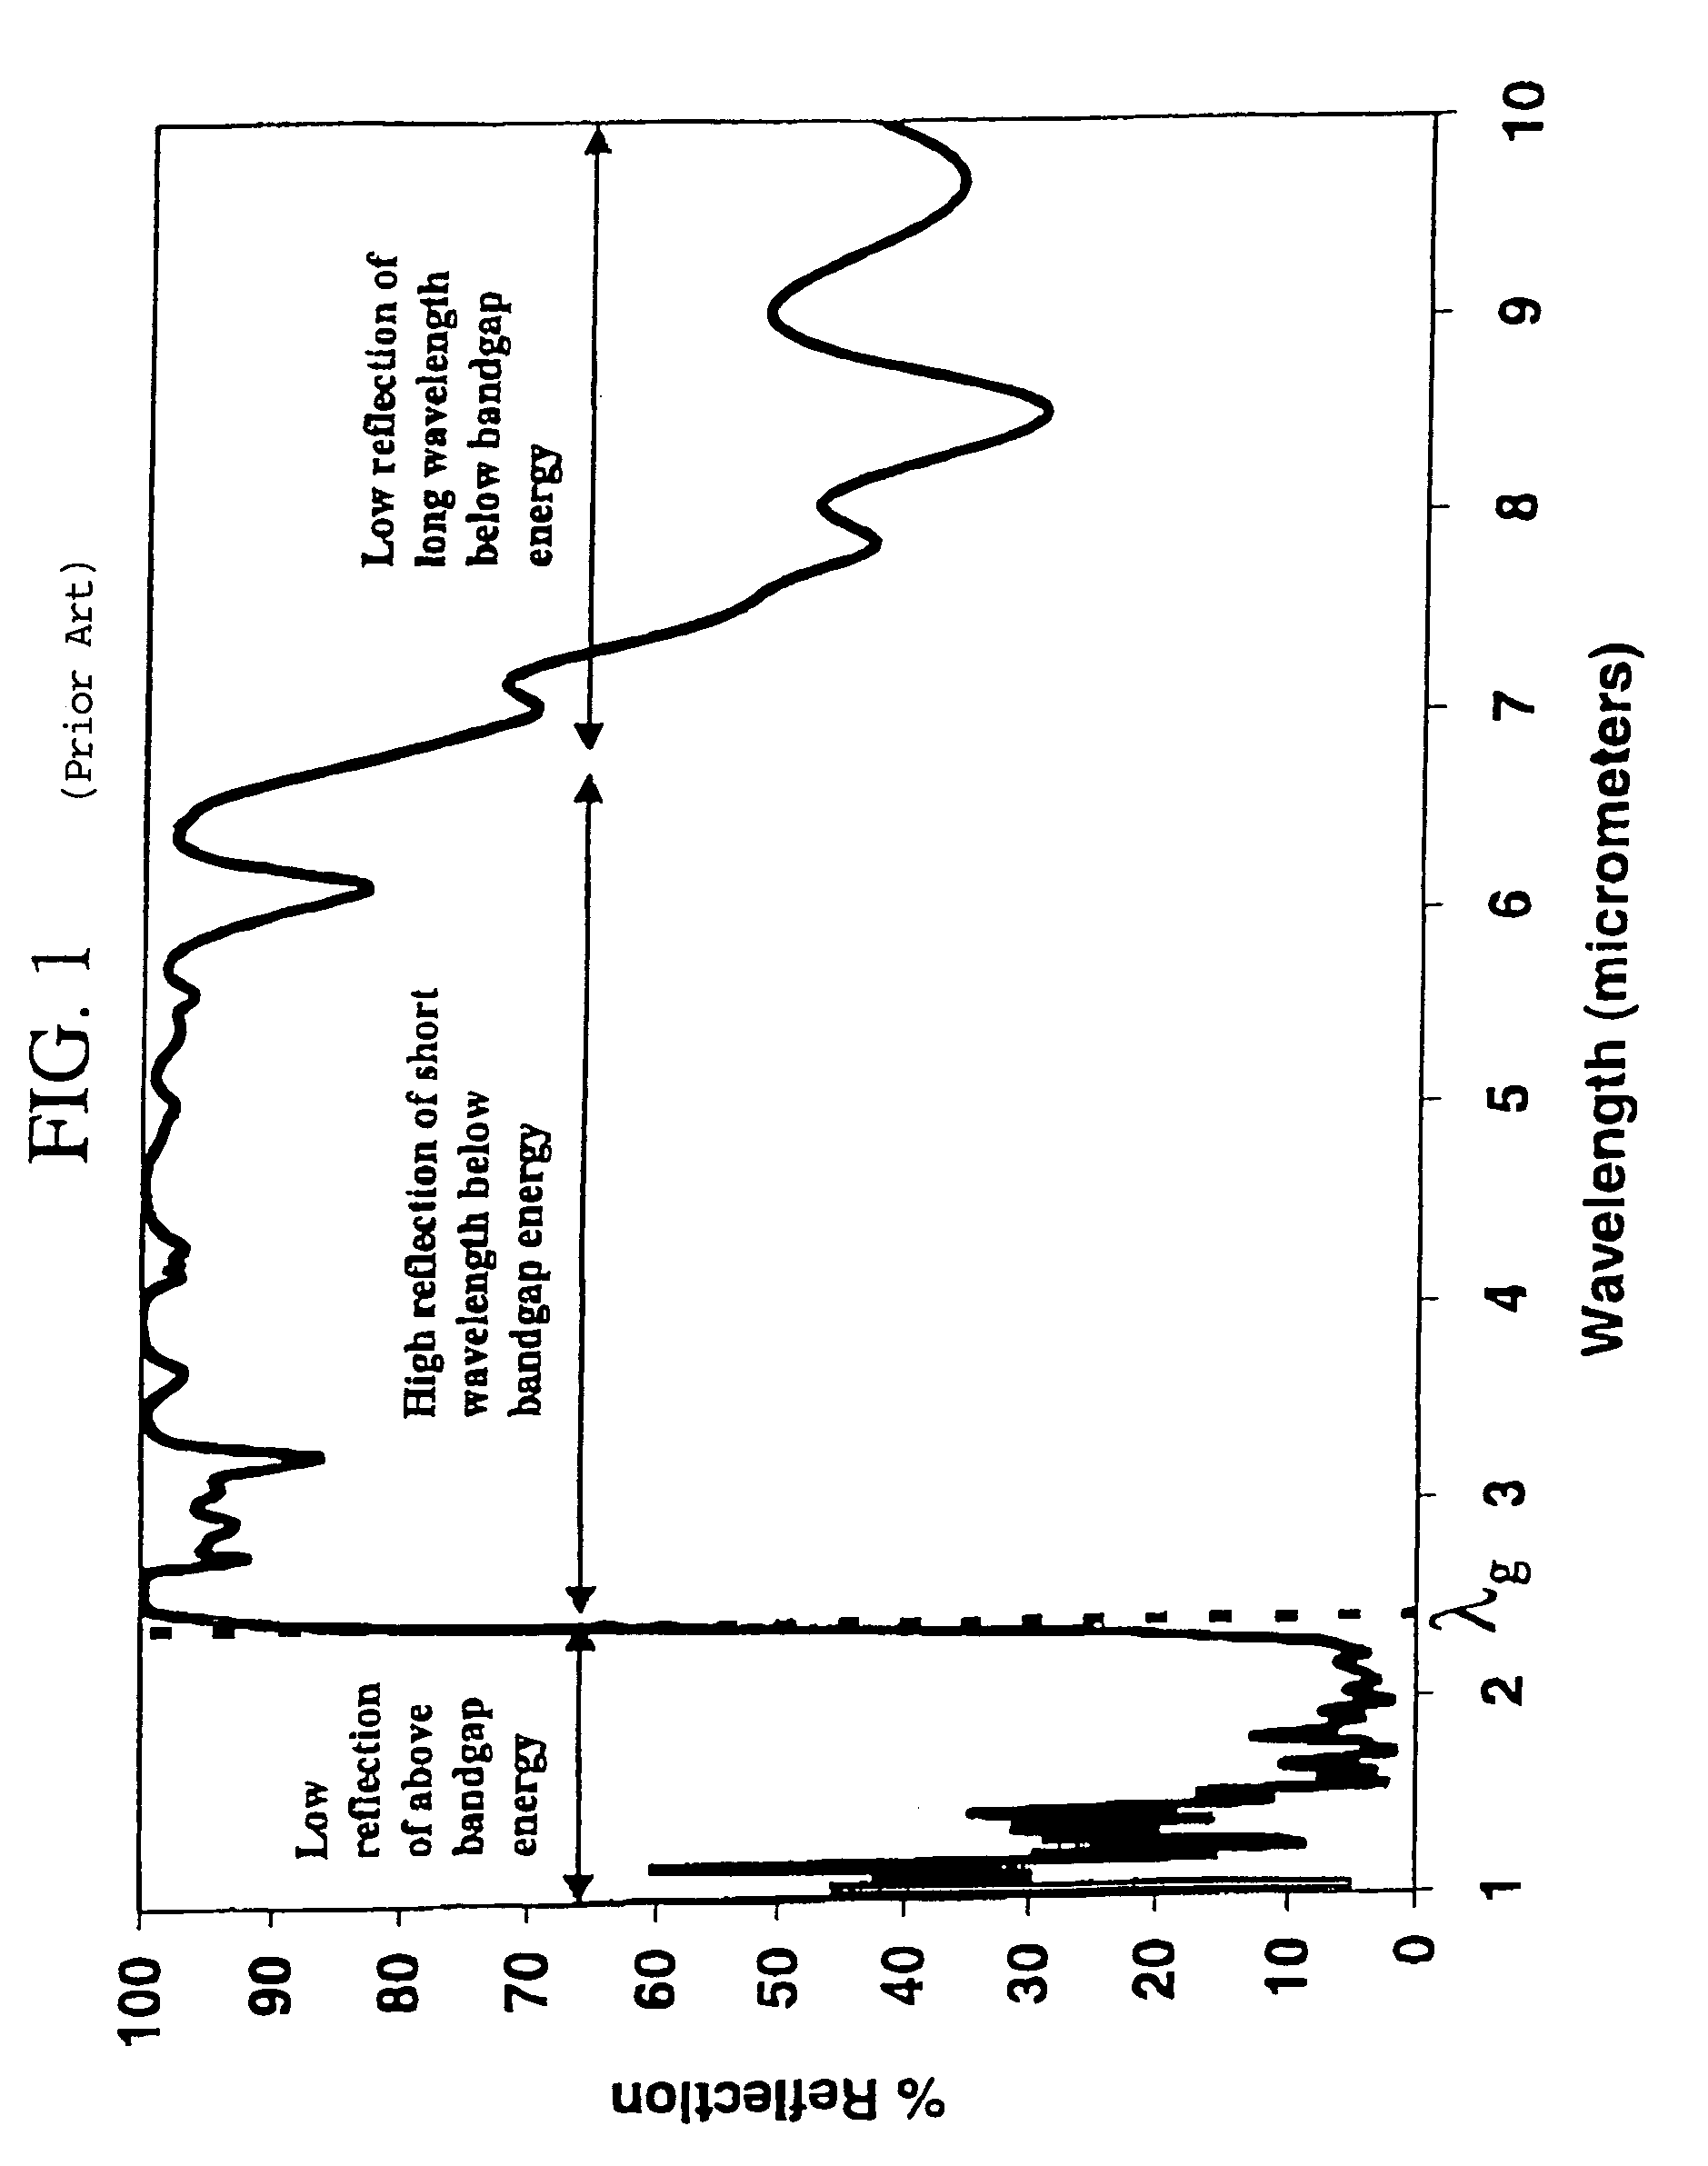 Tandem filters using frequency selective surfaces for enhanced conversion efficiency in a thermophotovoltaic energy conversion system